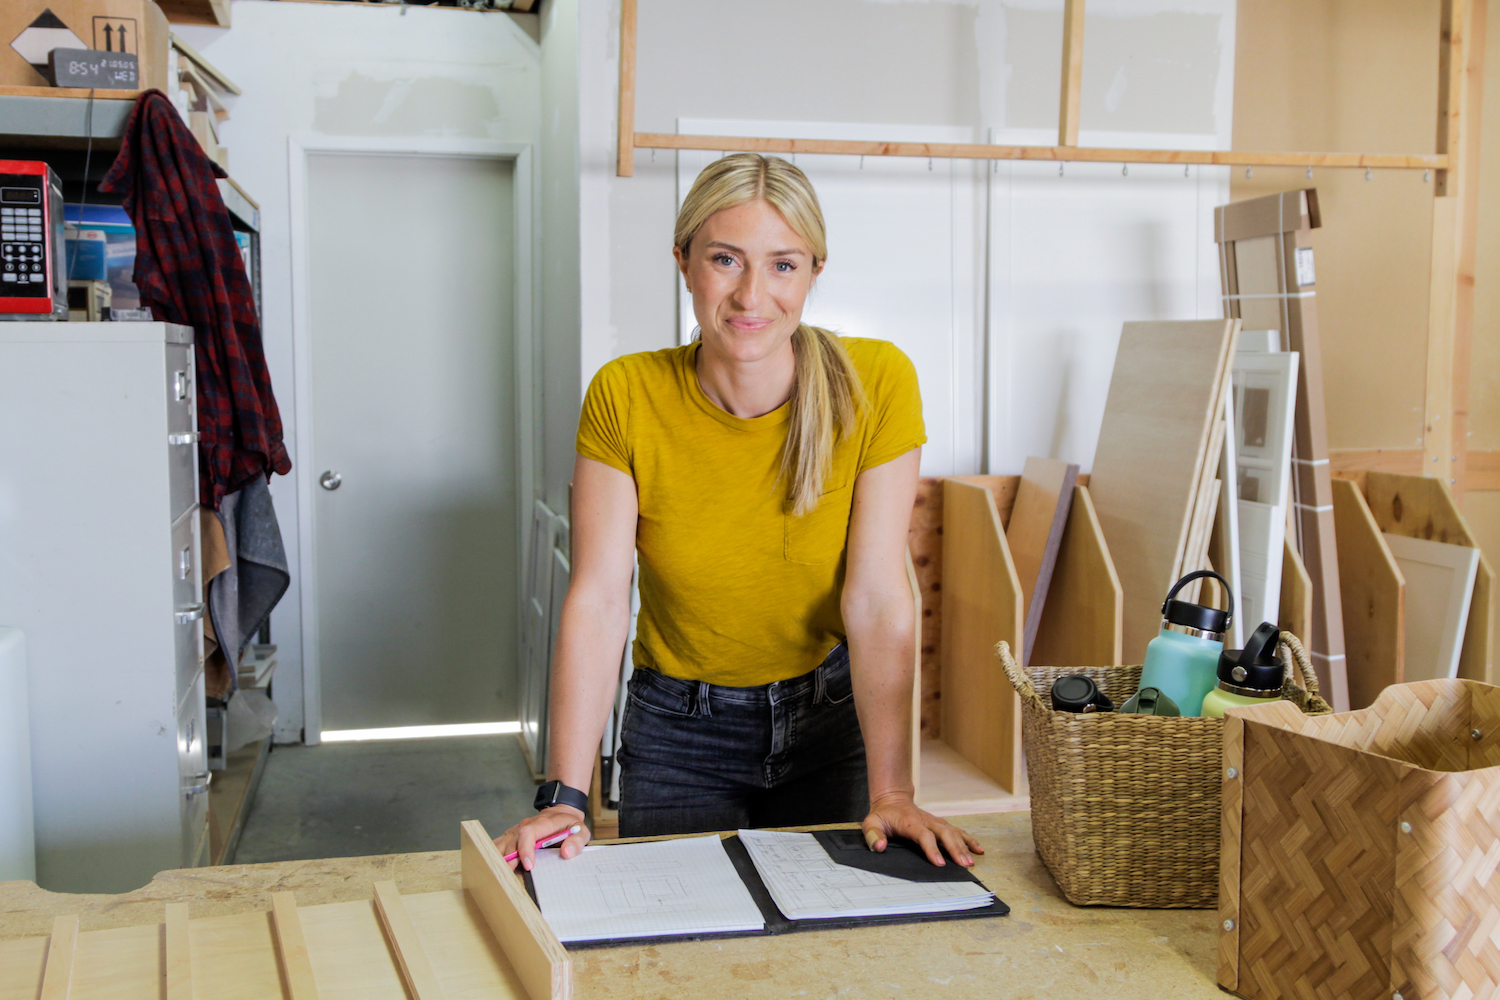 Jasmine Roth Blonde smiling woman in yellow t-shirt and jeans standing in a home under renovation